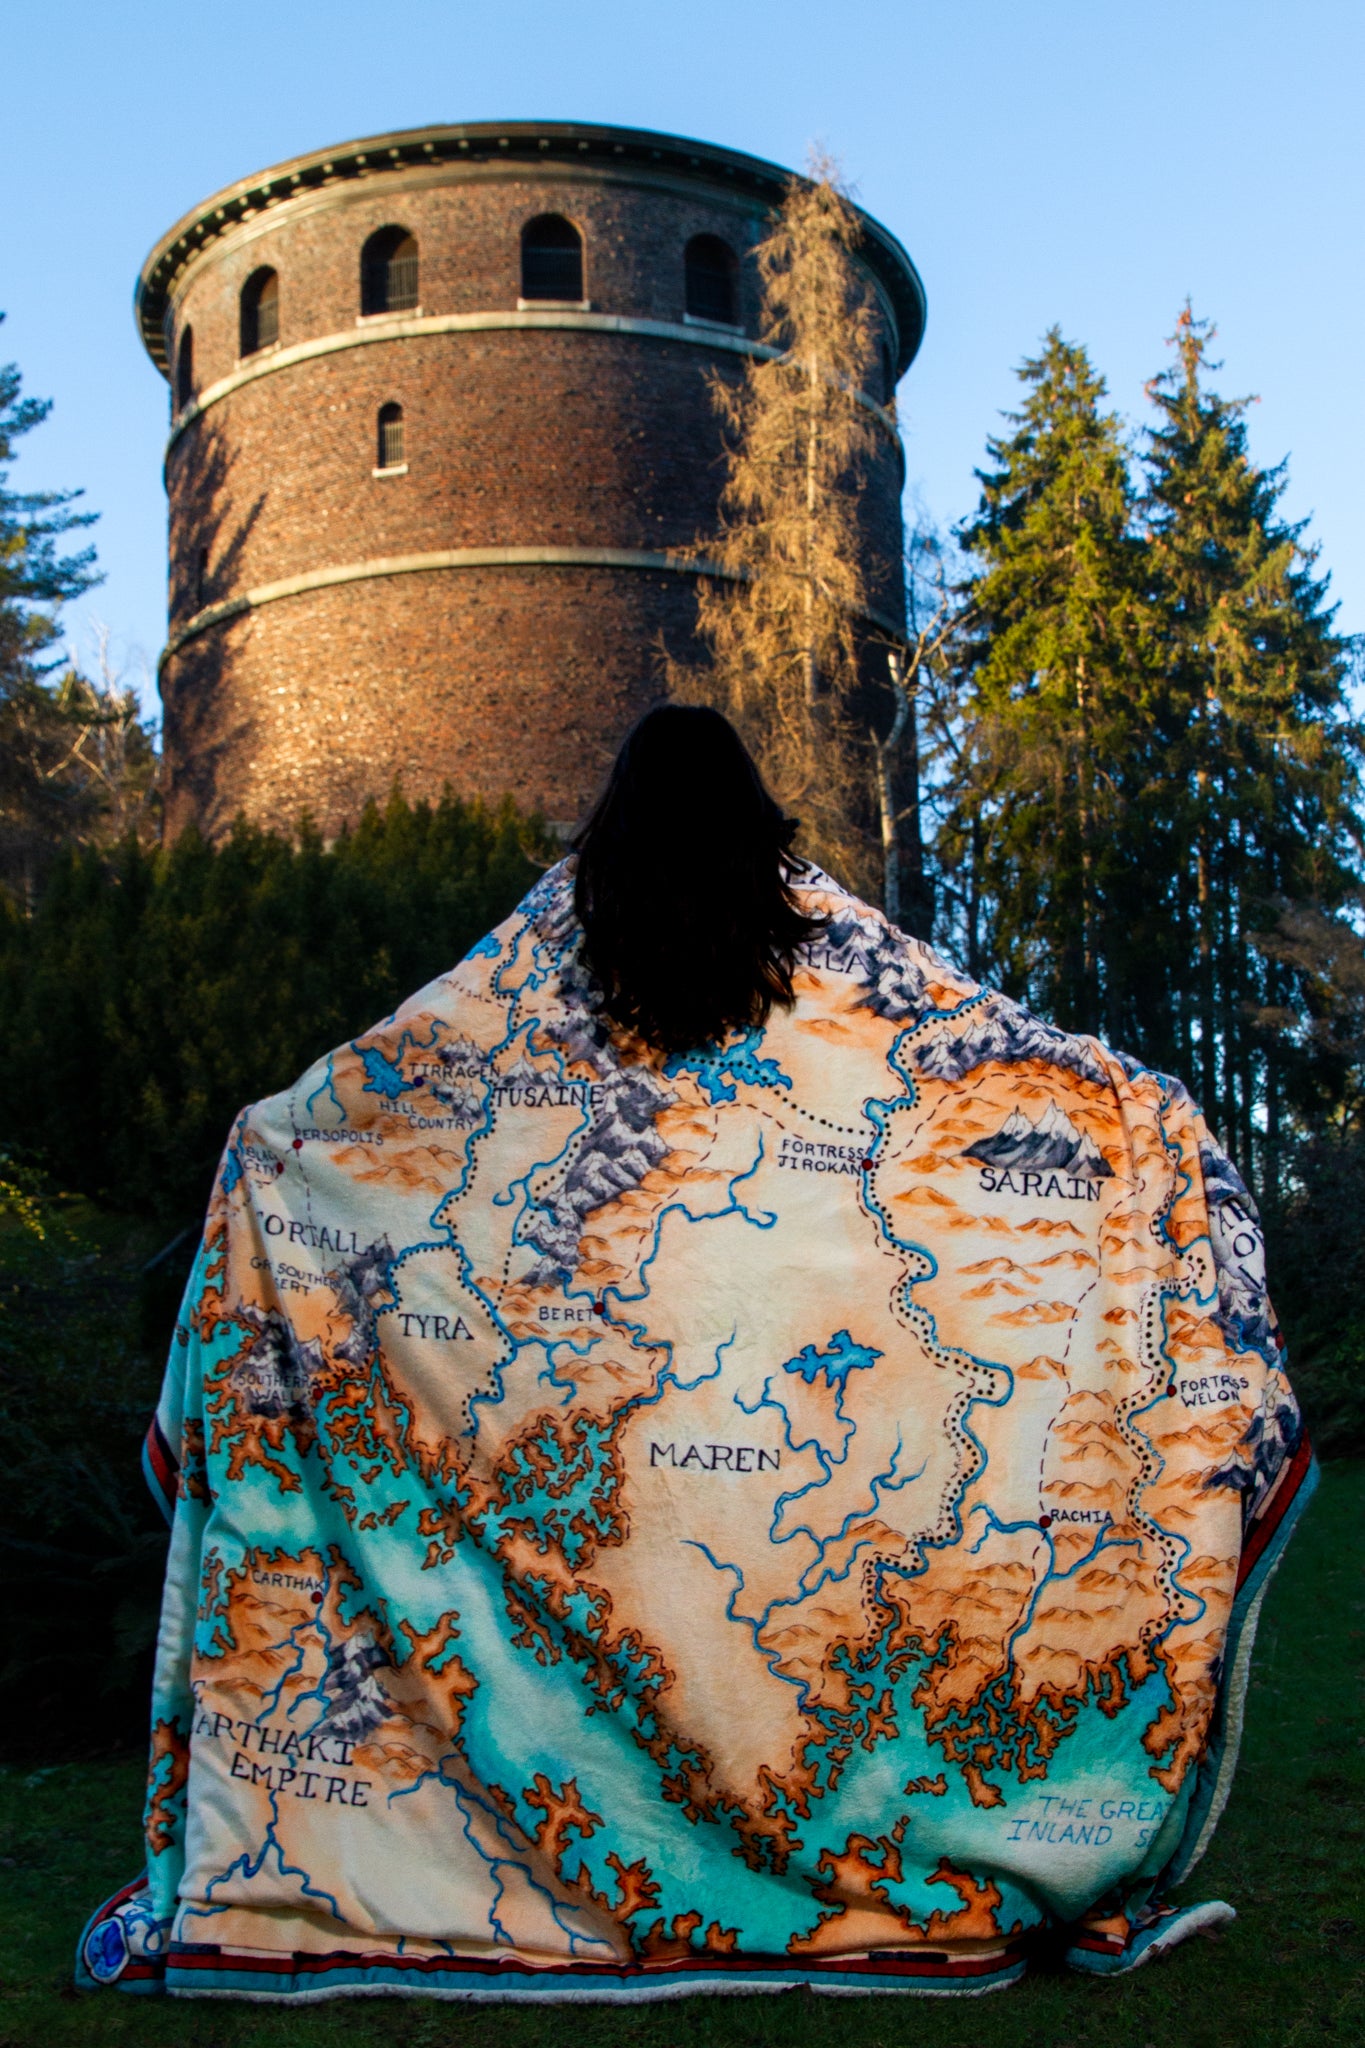 A view of a person from behind, wearing the Tortall blanket like an outstretched cape.